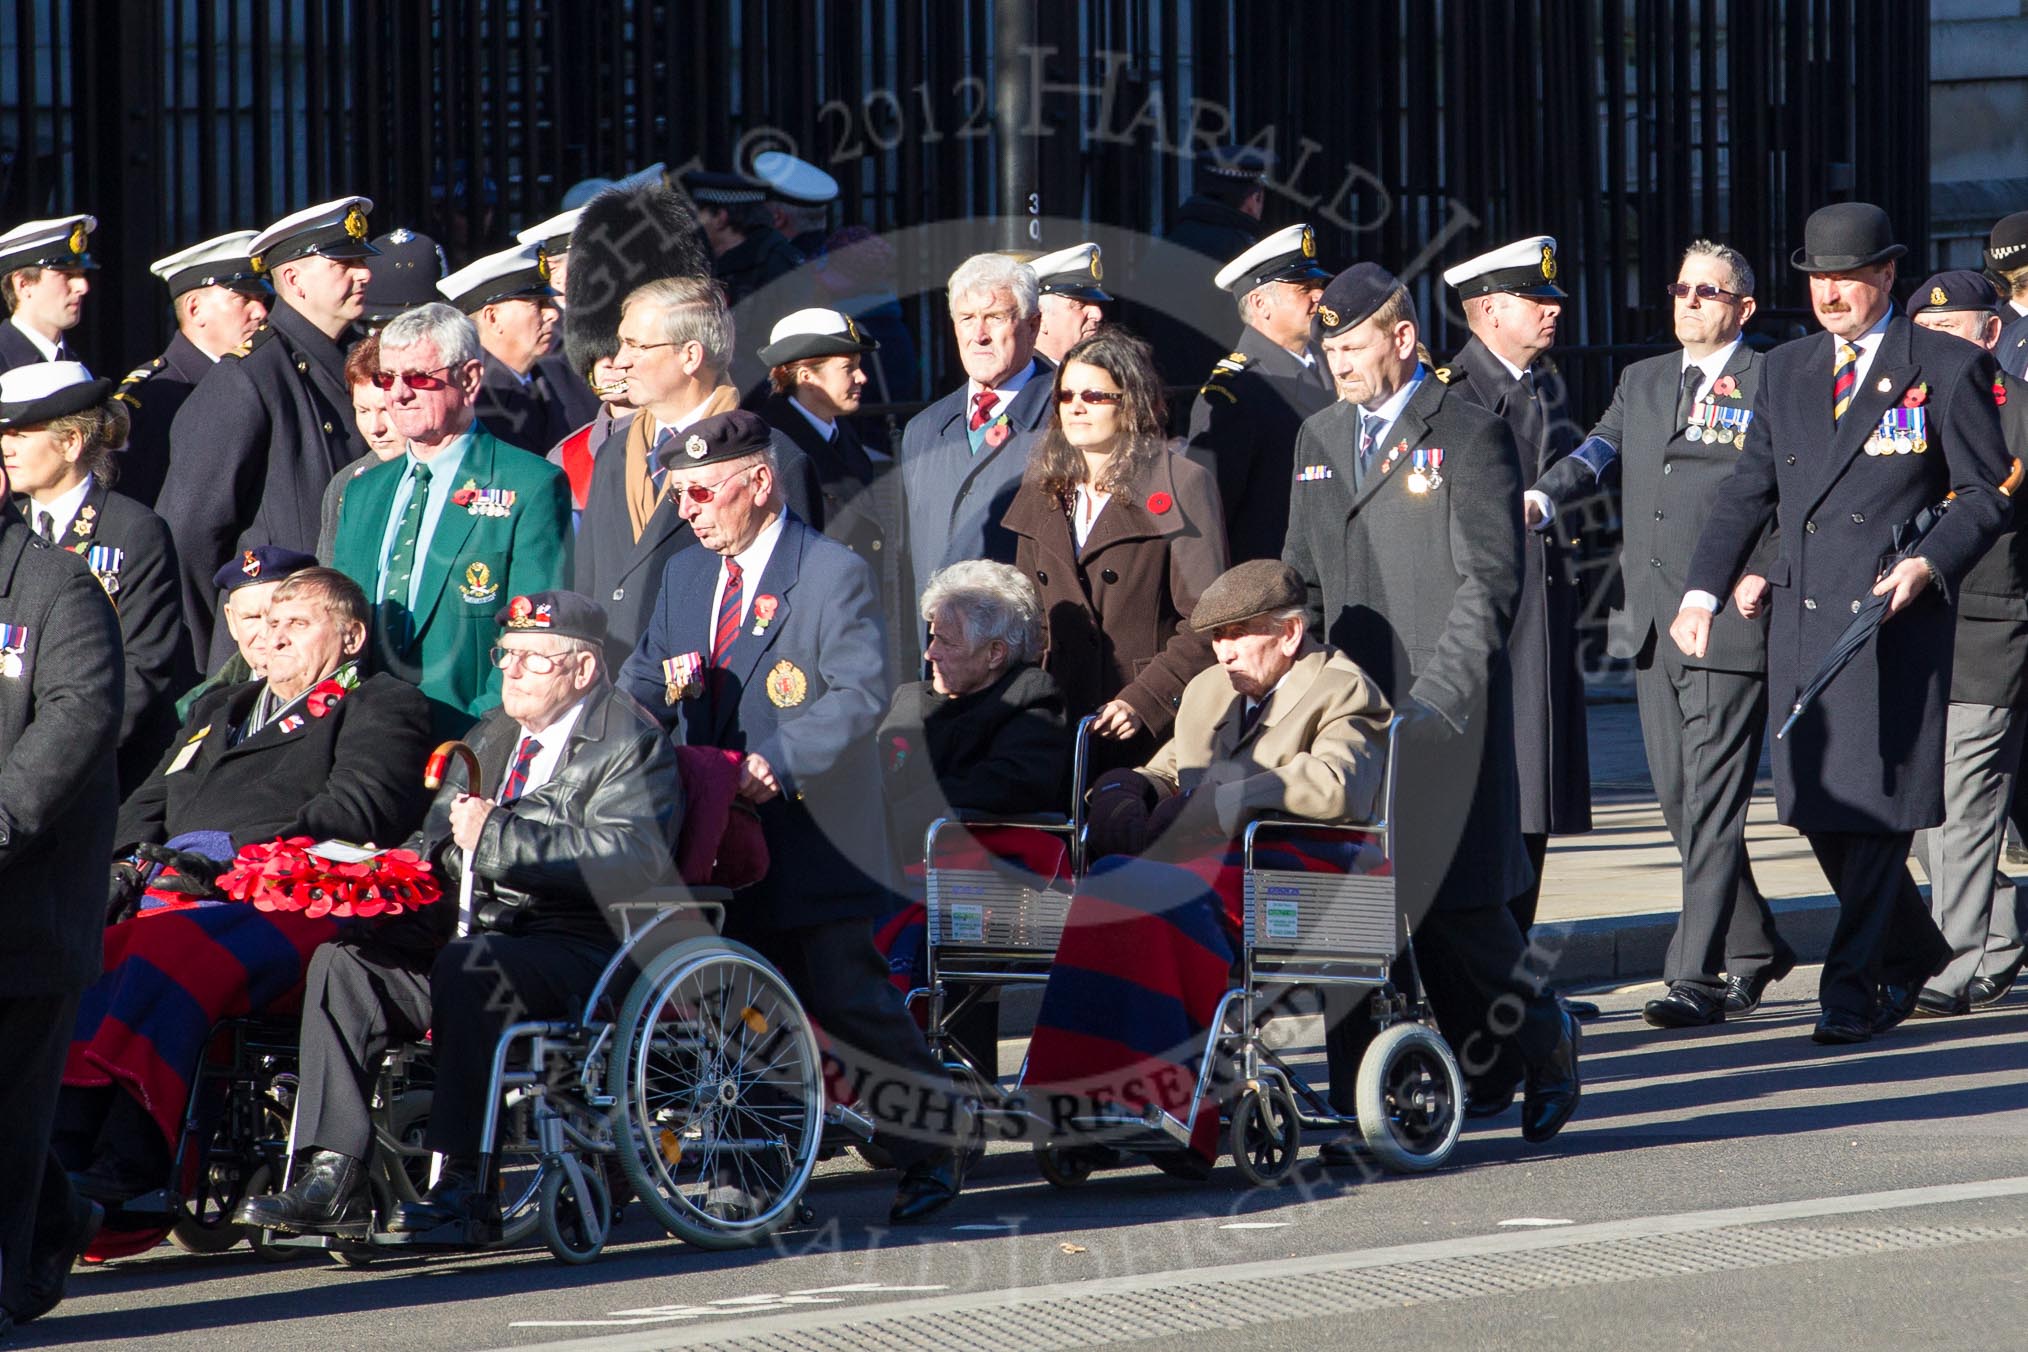 Remembrance Sunday 2012 Cenotaph March Past: Group C1, Blind Veterans UK and B1, Royal Army Medical Corps Association..
Whitehall, Cenotaph,
London SW1,

United Kingdom,
on 11 November 2012 at 11:54, image #801